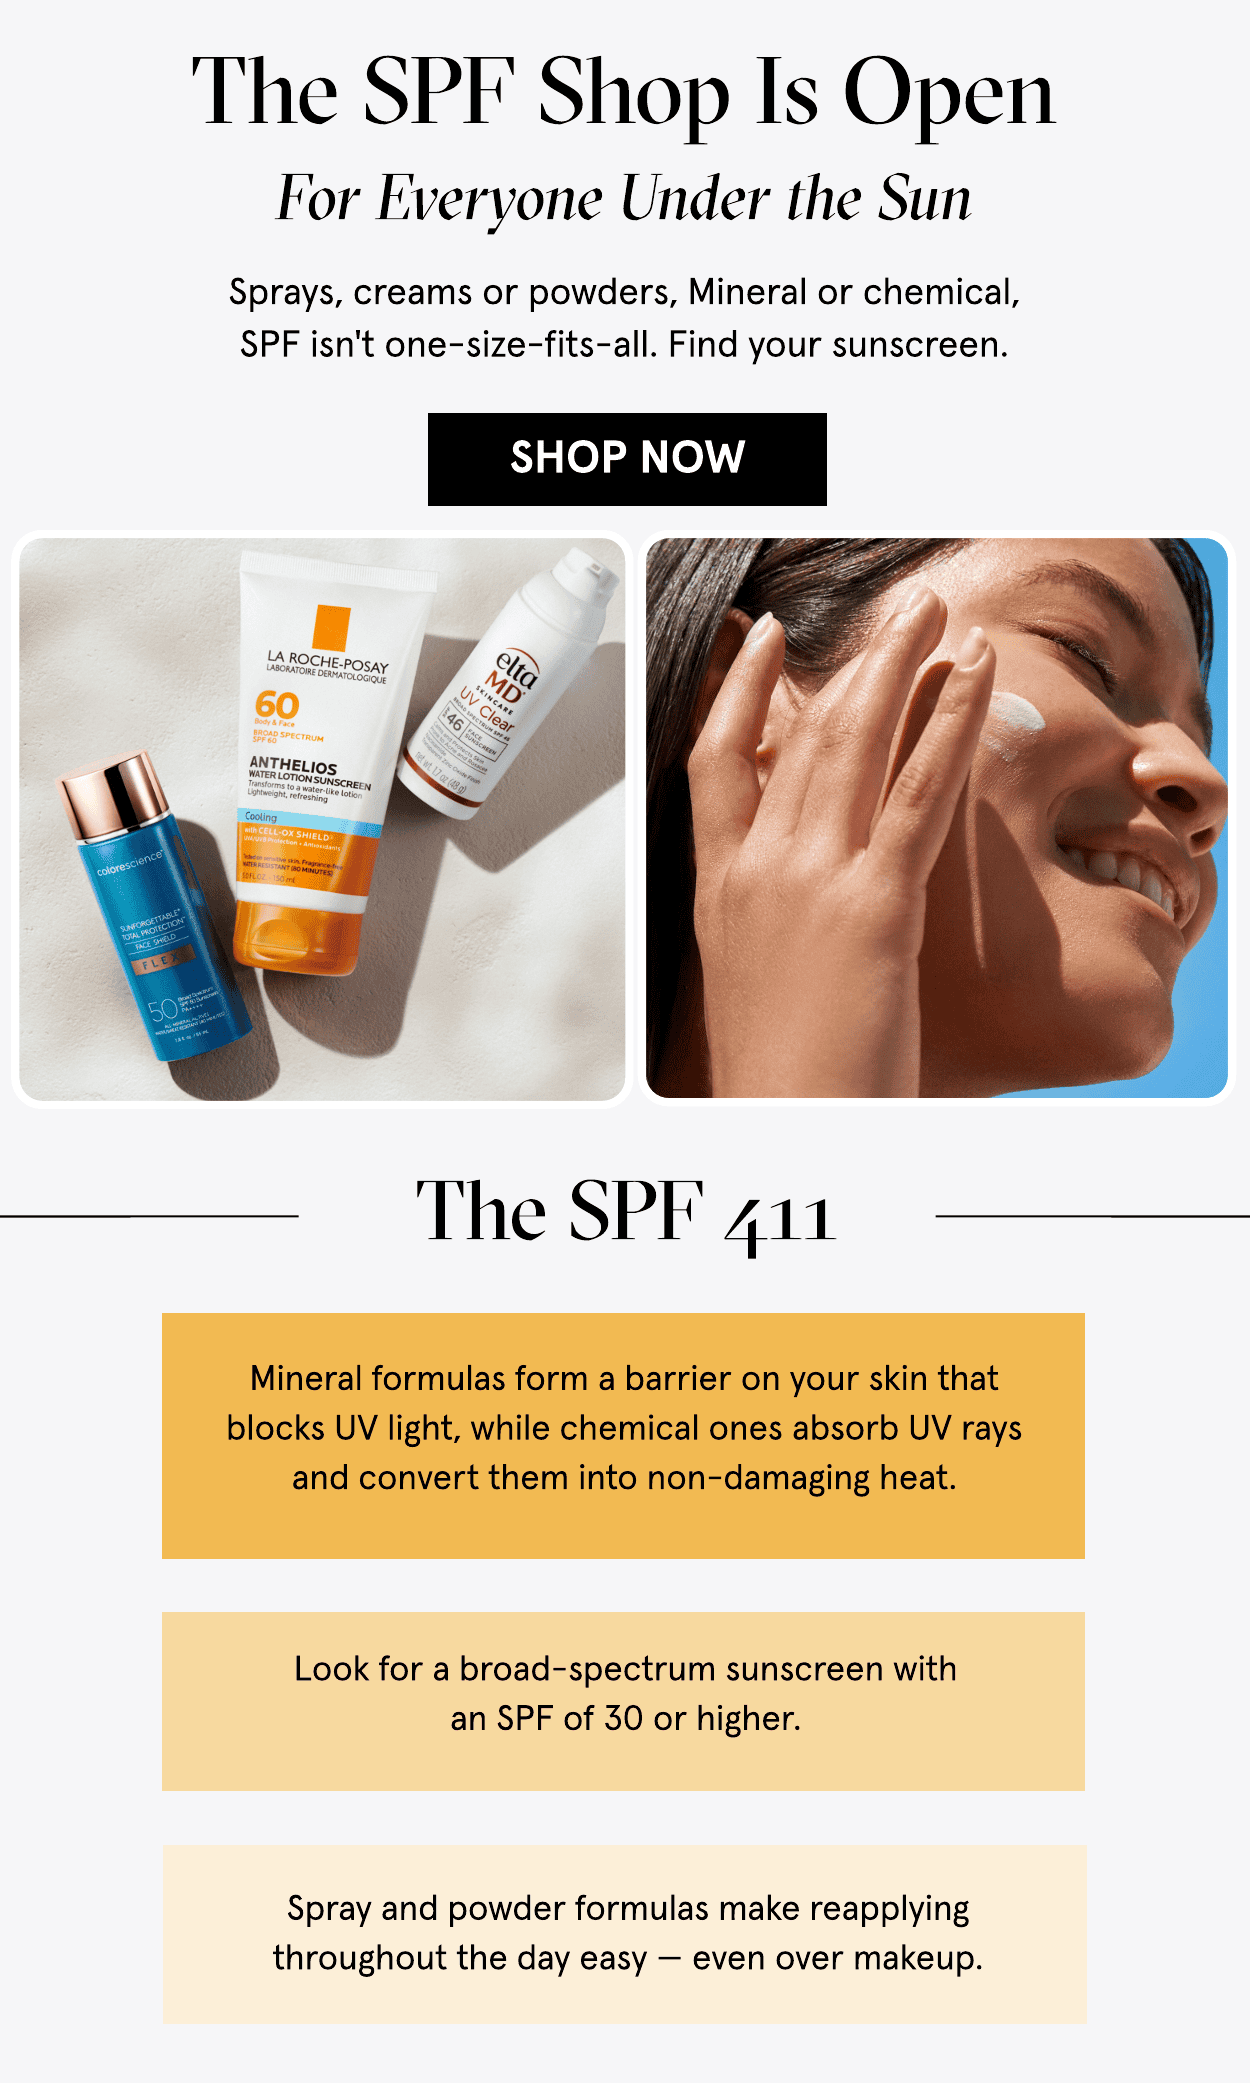 The SPF Shop Is open